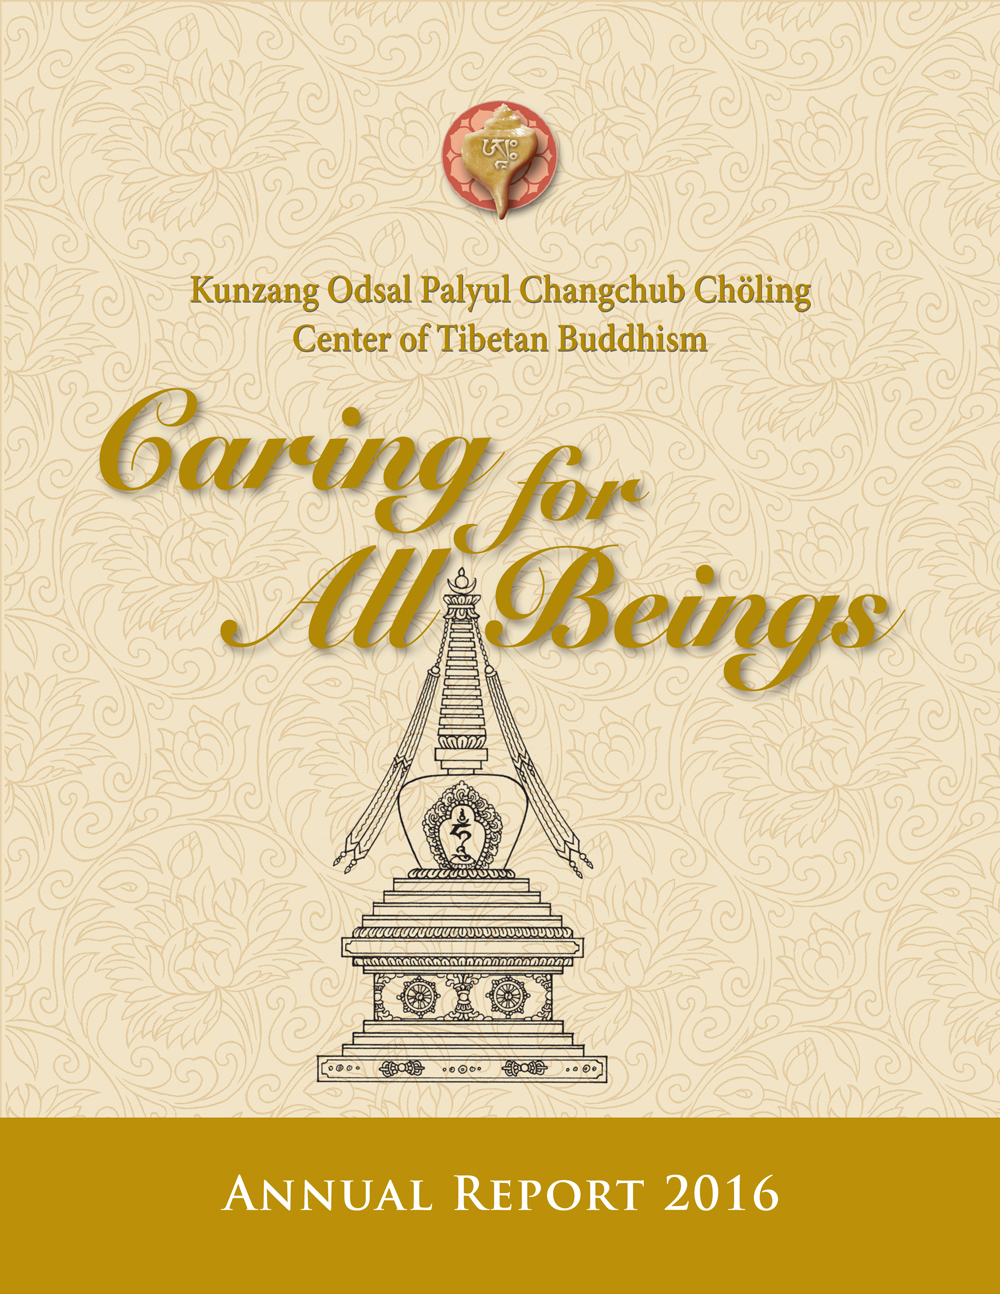 KPC 2016 Annual Report - Caring for All Beings